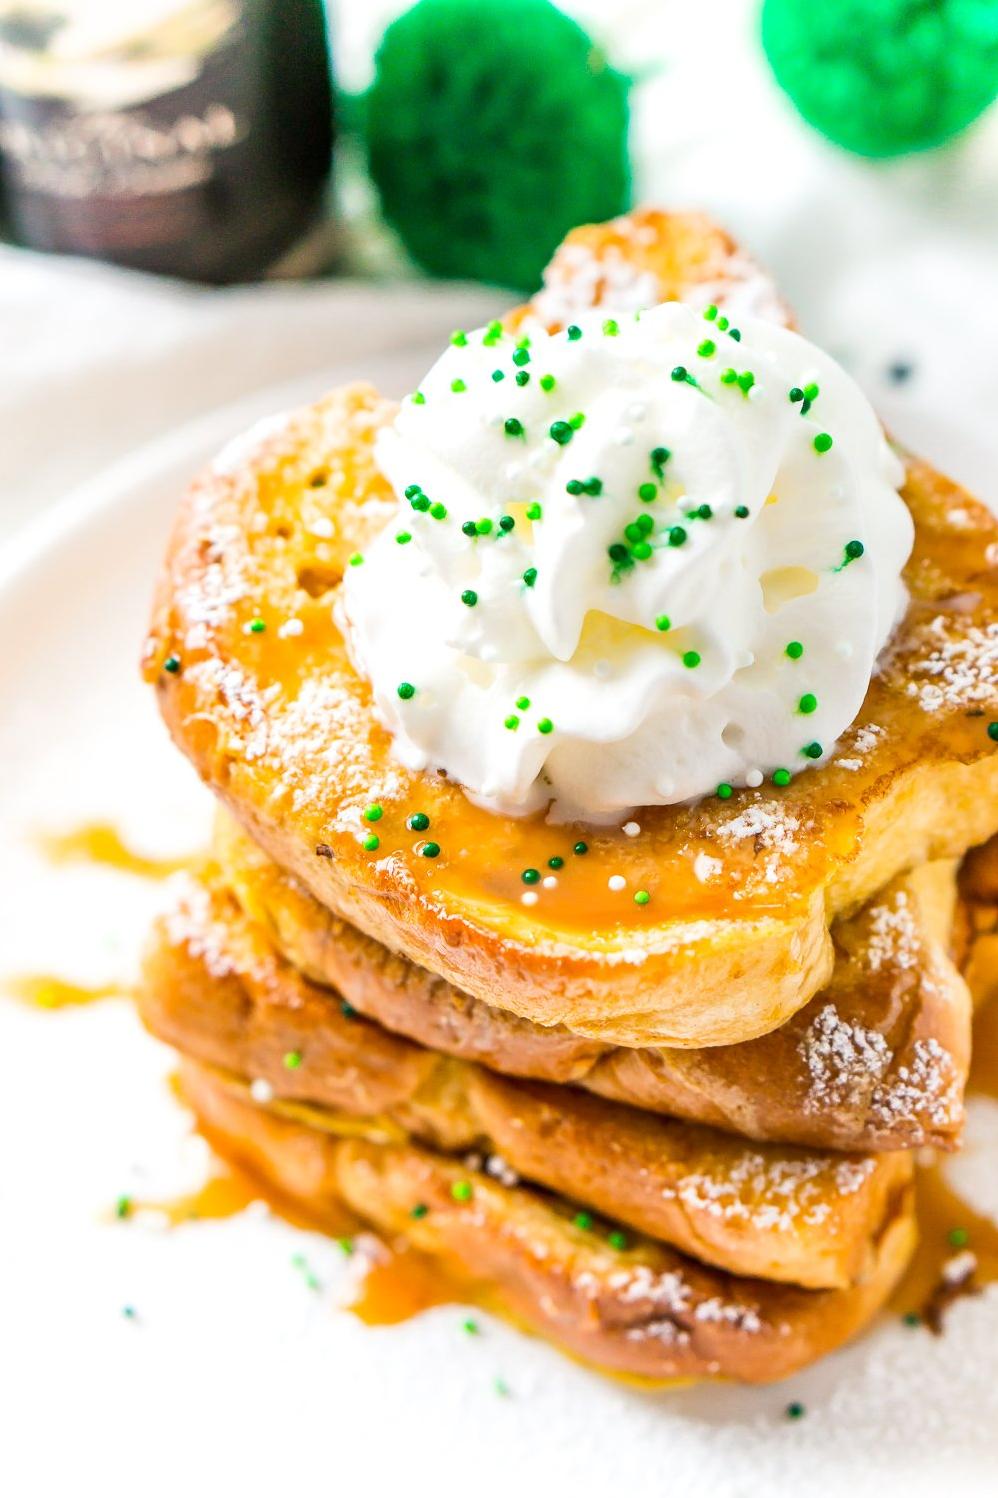  Indulge in this creamy French Toast for brunch today!